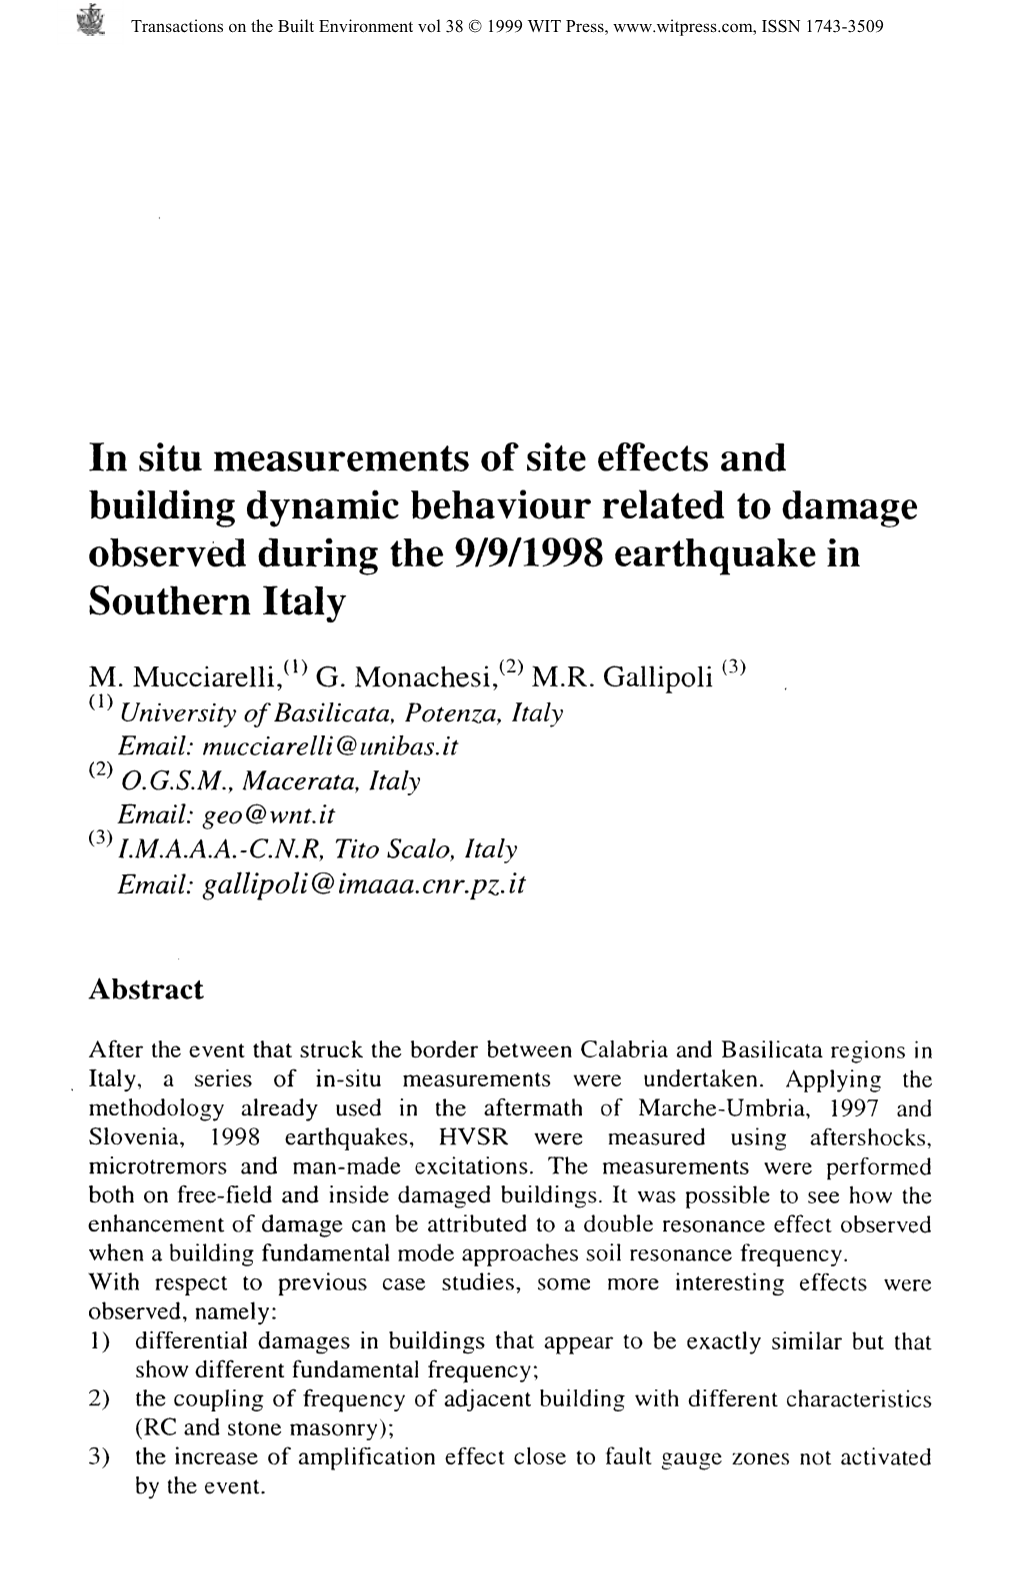 In Situ Measurements of Site Effects and Building Dynamic Behaviour Related to Damage Observed During the 9/9/1998 Earthquake In